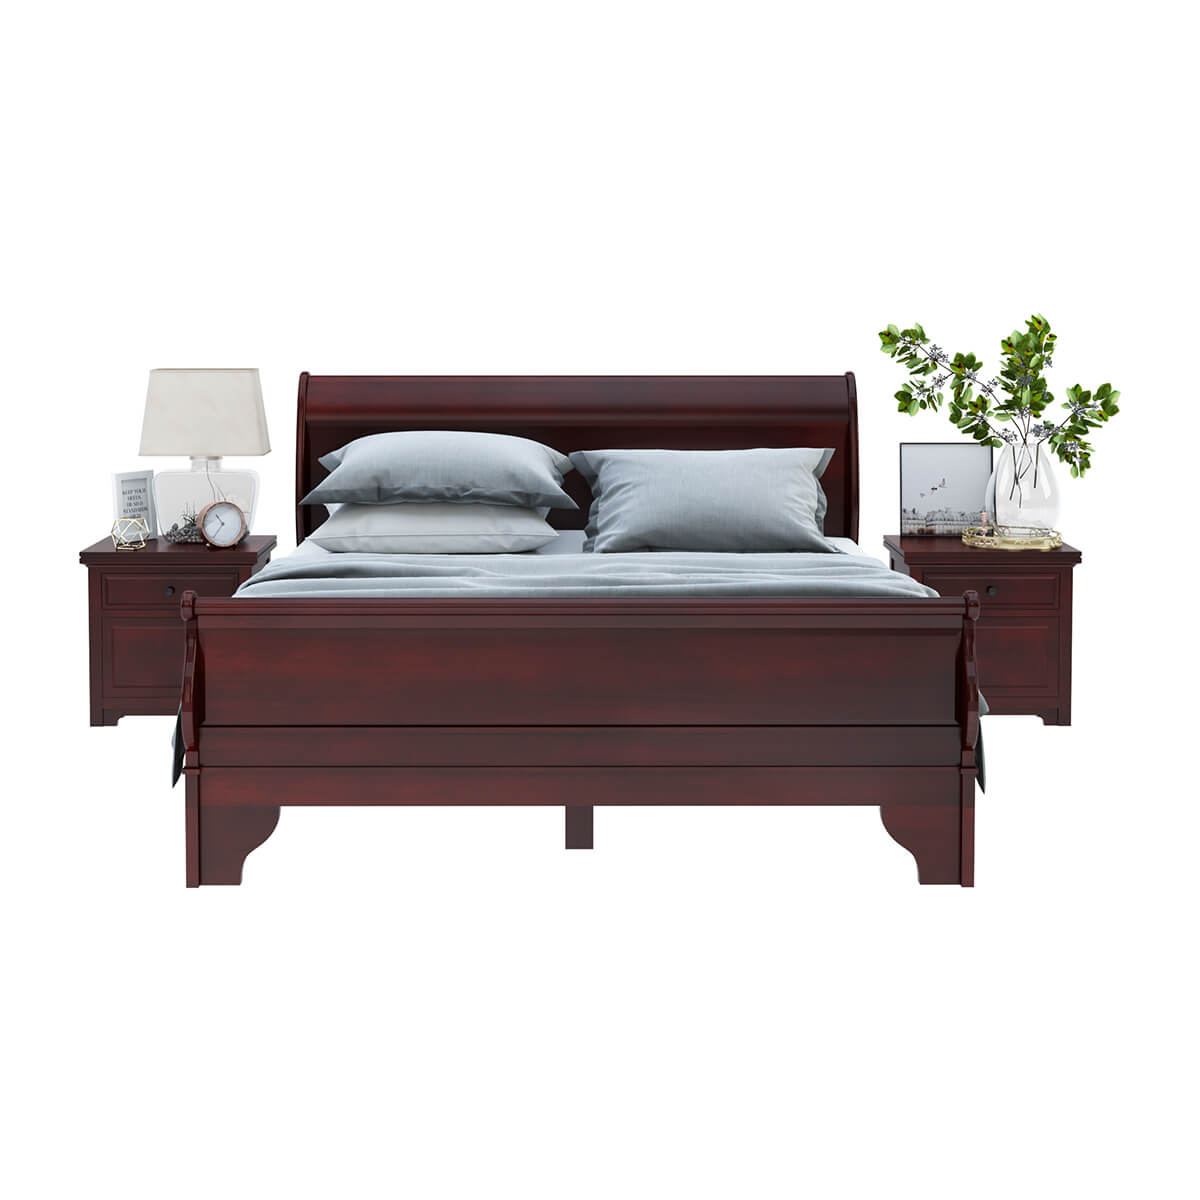 Carina Real Solid Wood Contemporary Platform Sleigh Bed w Corbel Shaped Feet